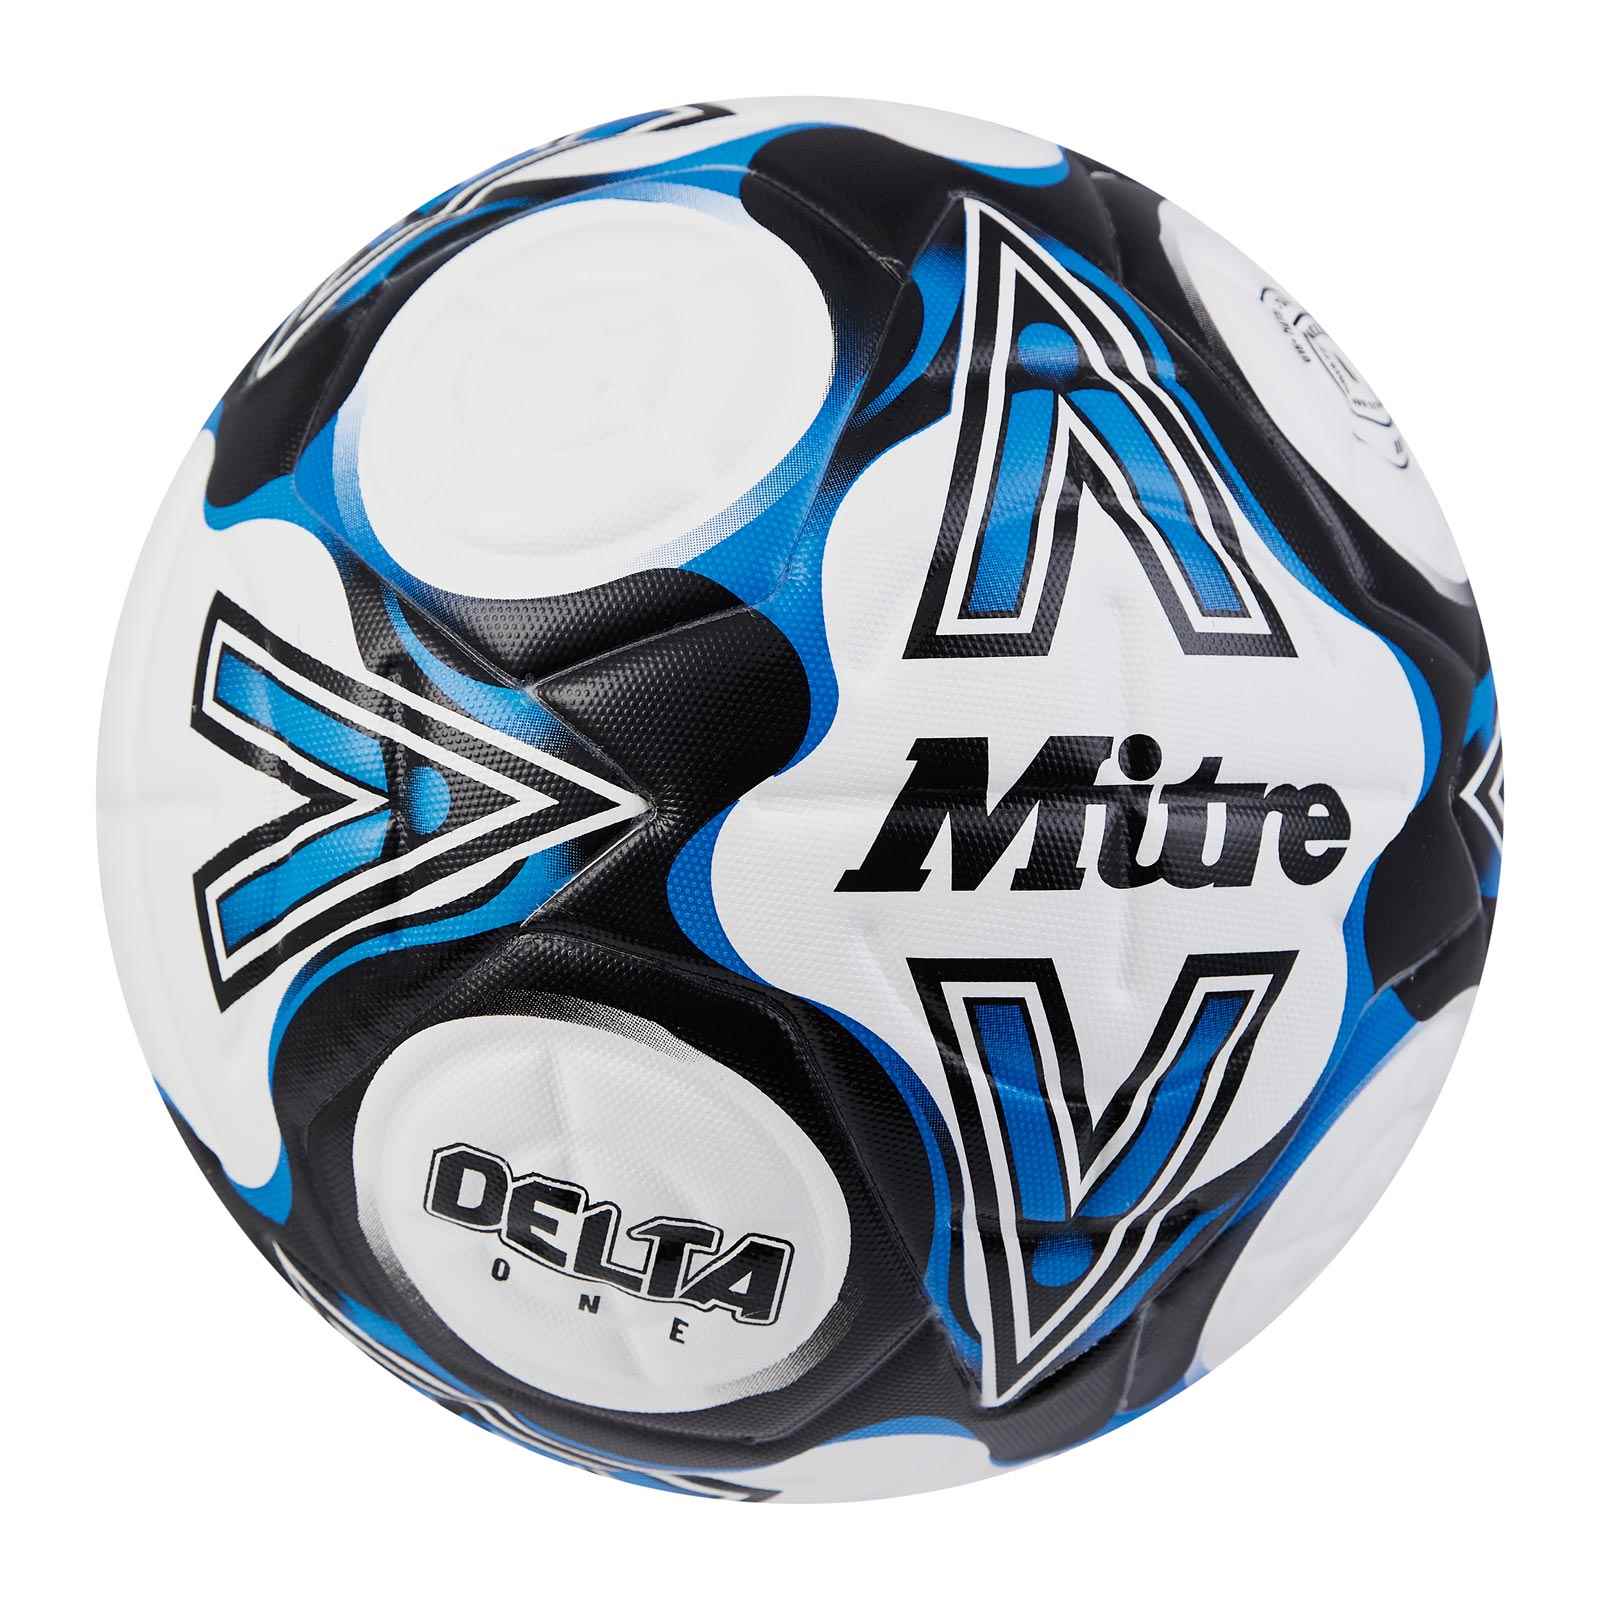 MITRE DELTA ONE 24 FOOTBALL - SIZE 5